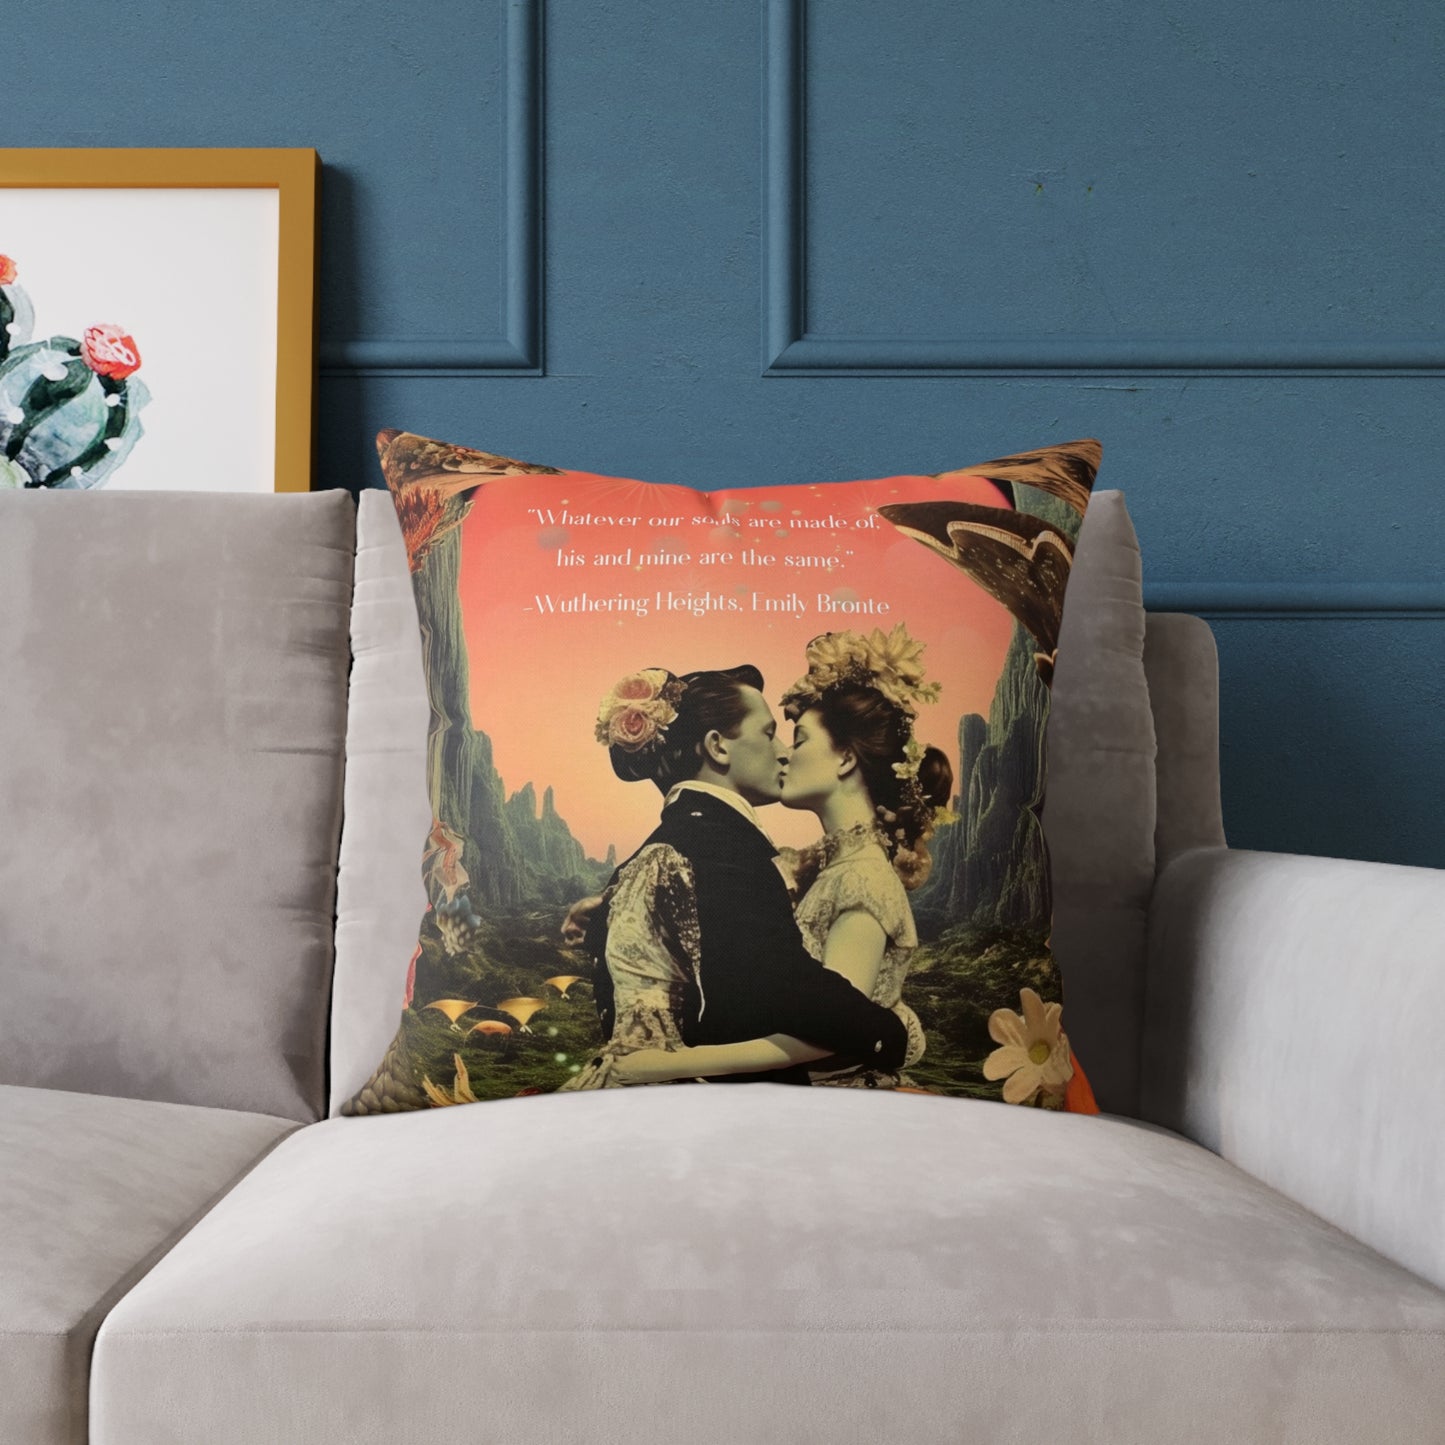 'Whatever our souls", from Wuthering Heights by Emily Bronte quote, Luxury Cushion